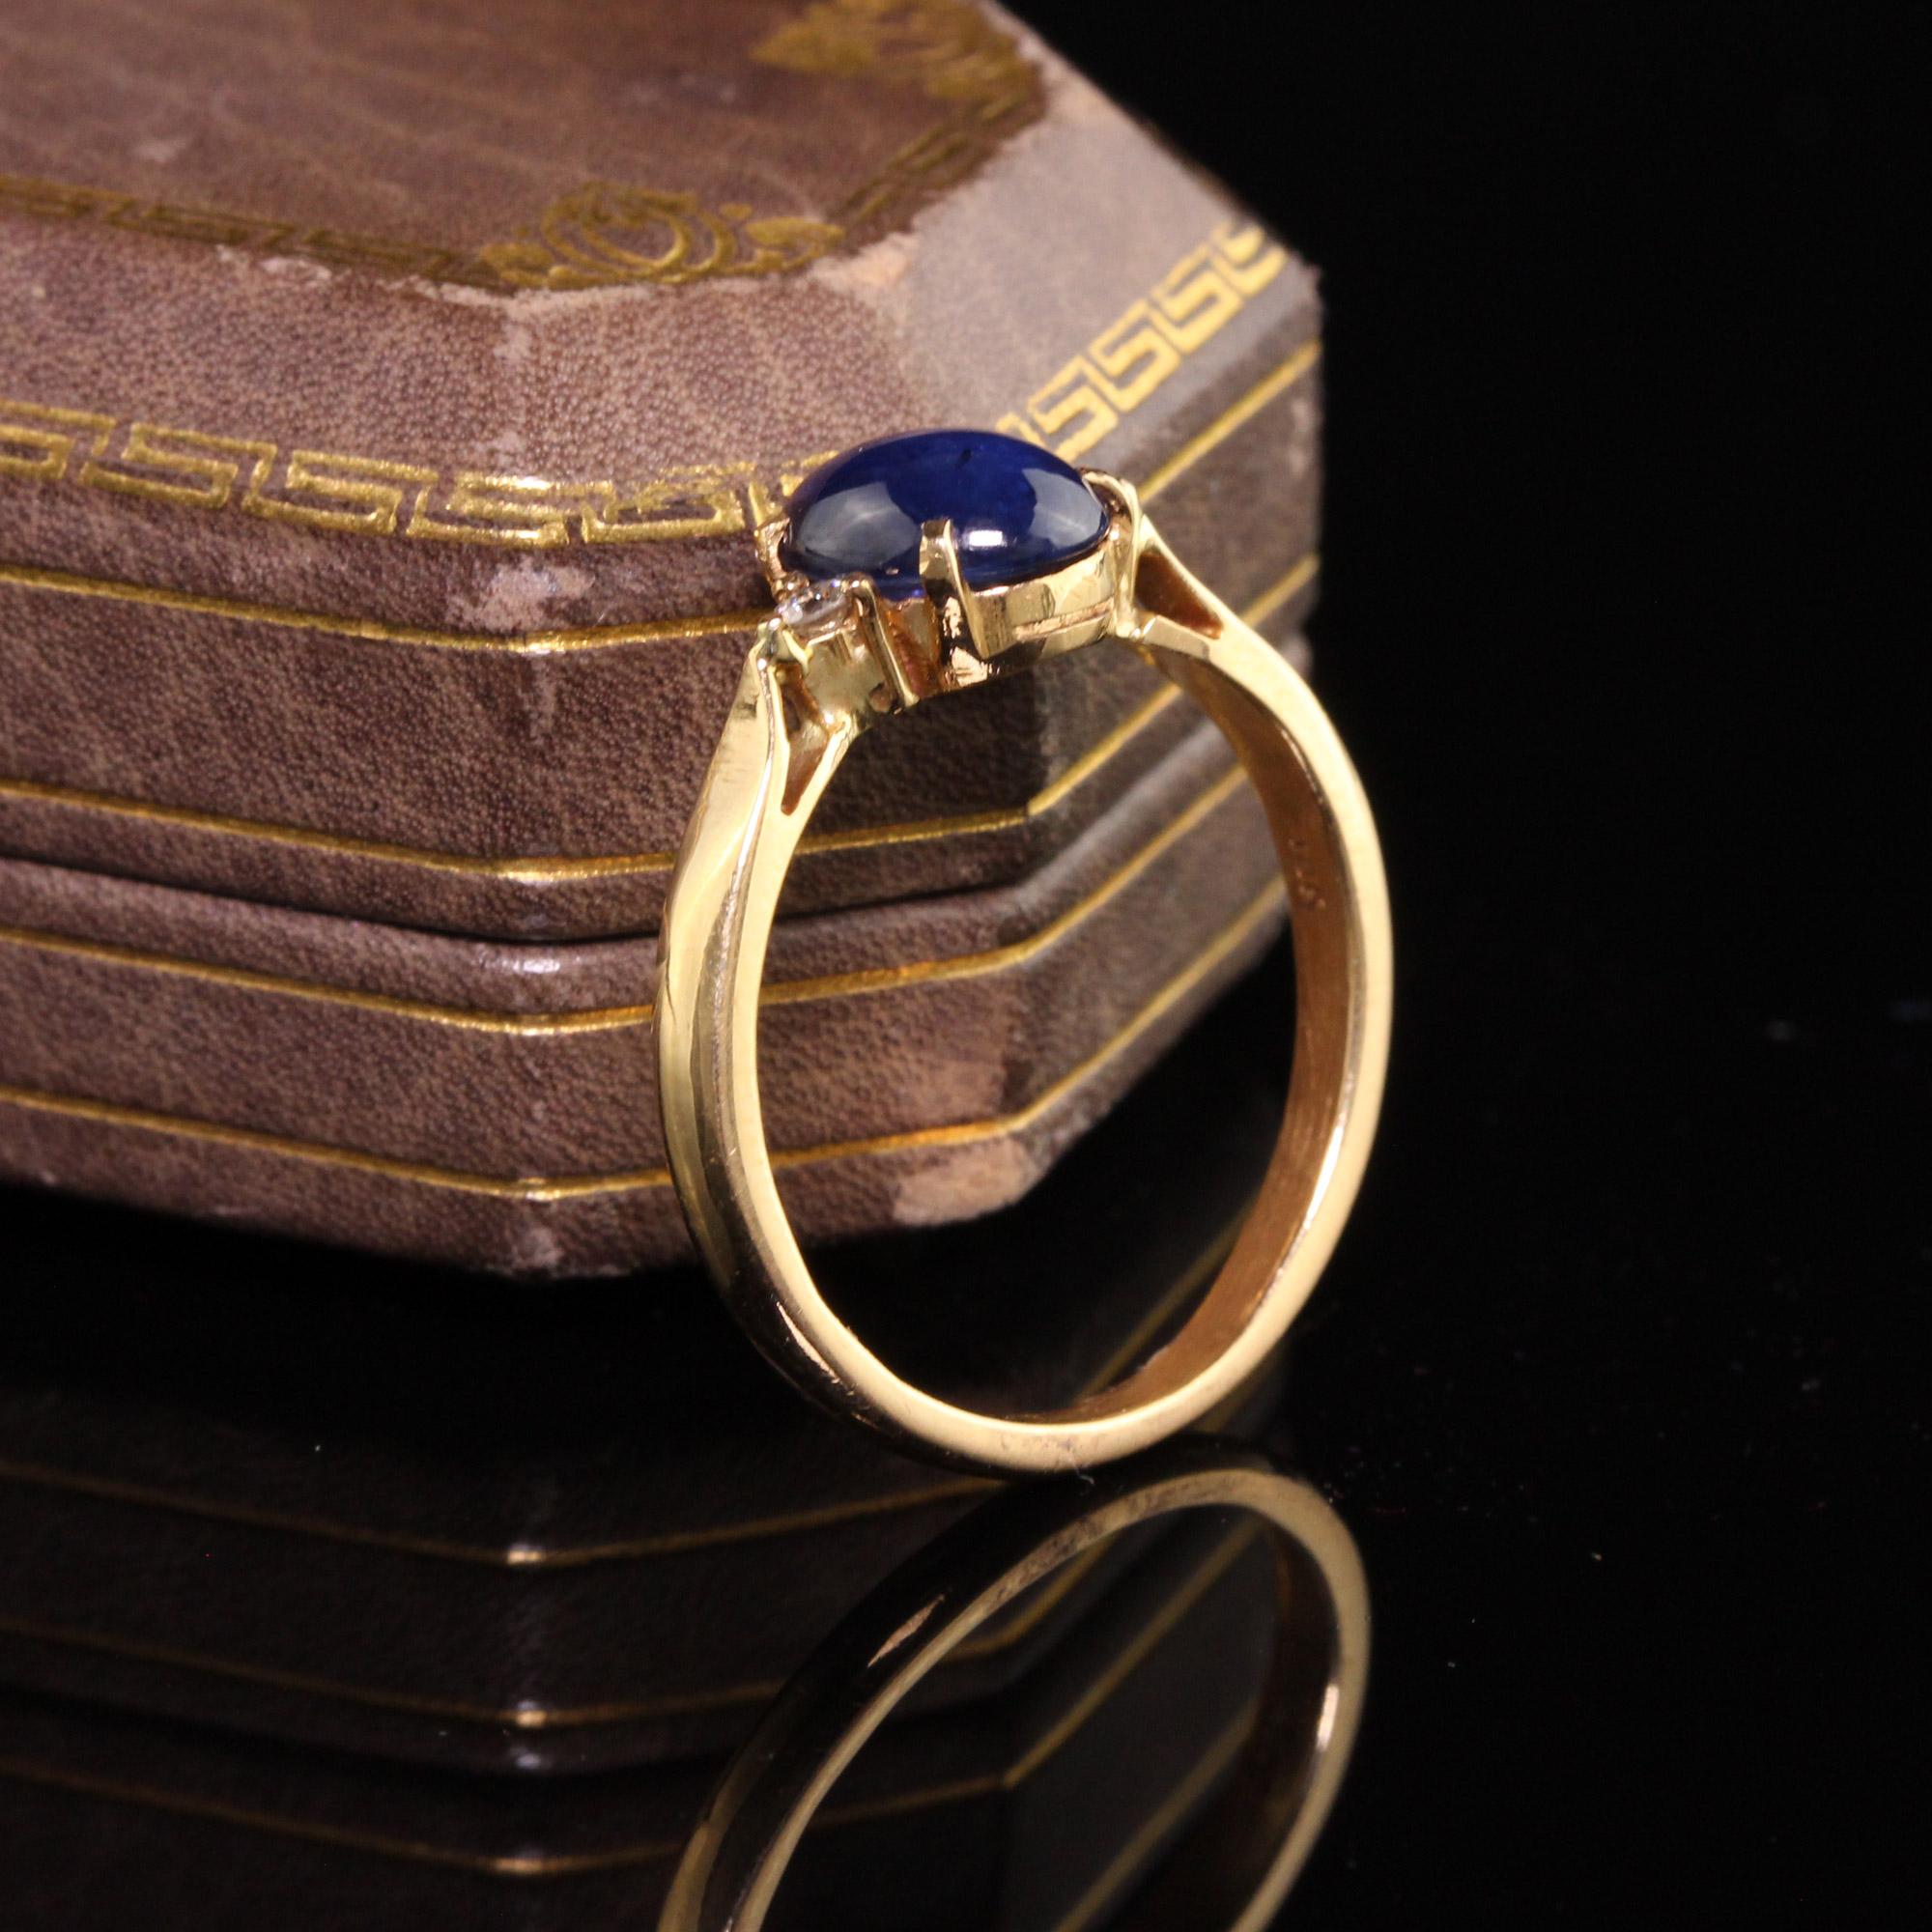 Stunning Retro Estate 18K Yellow Gold Cabochon Sapphire Diamond Ring. This beautiful ring features a gorgeous blue sapphire in the center with a diamond on each side.

Item #R0471

Metal: 18K Yellow Gold

Weight: 2.4 Grams

Total Diamond Weight: